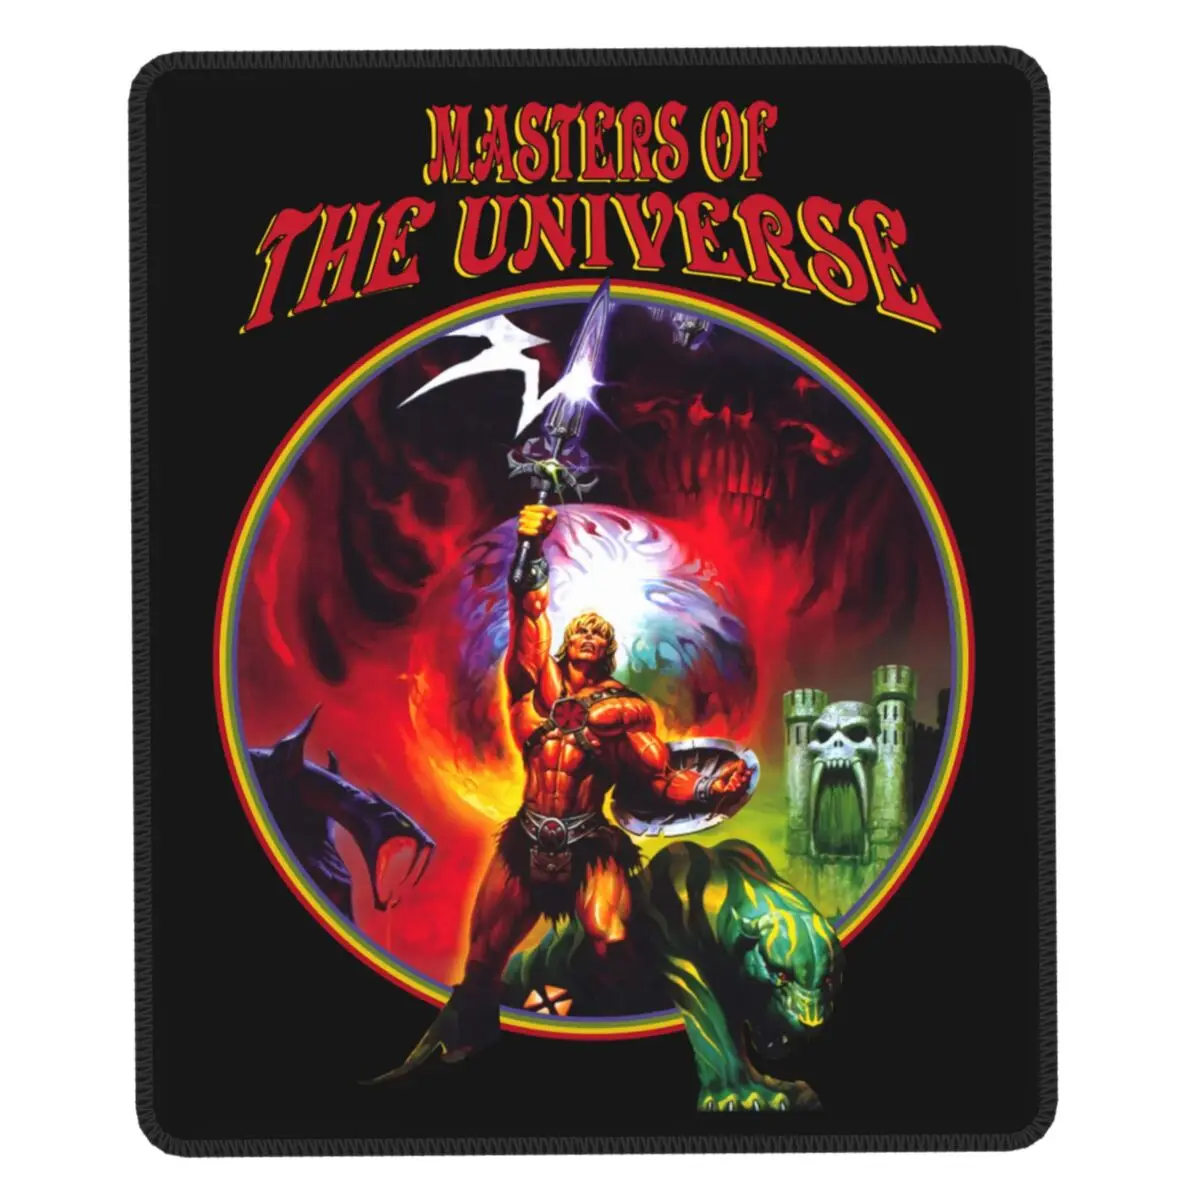 

He Man Masters Of The Universe Anime Mouse Pad Rubber Base Vintage Mousepad Office Desk Computer 80s Skeletor She Ra Beast Mat